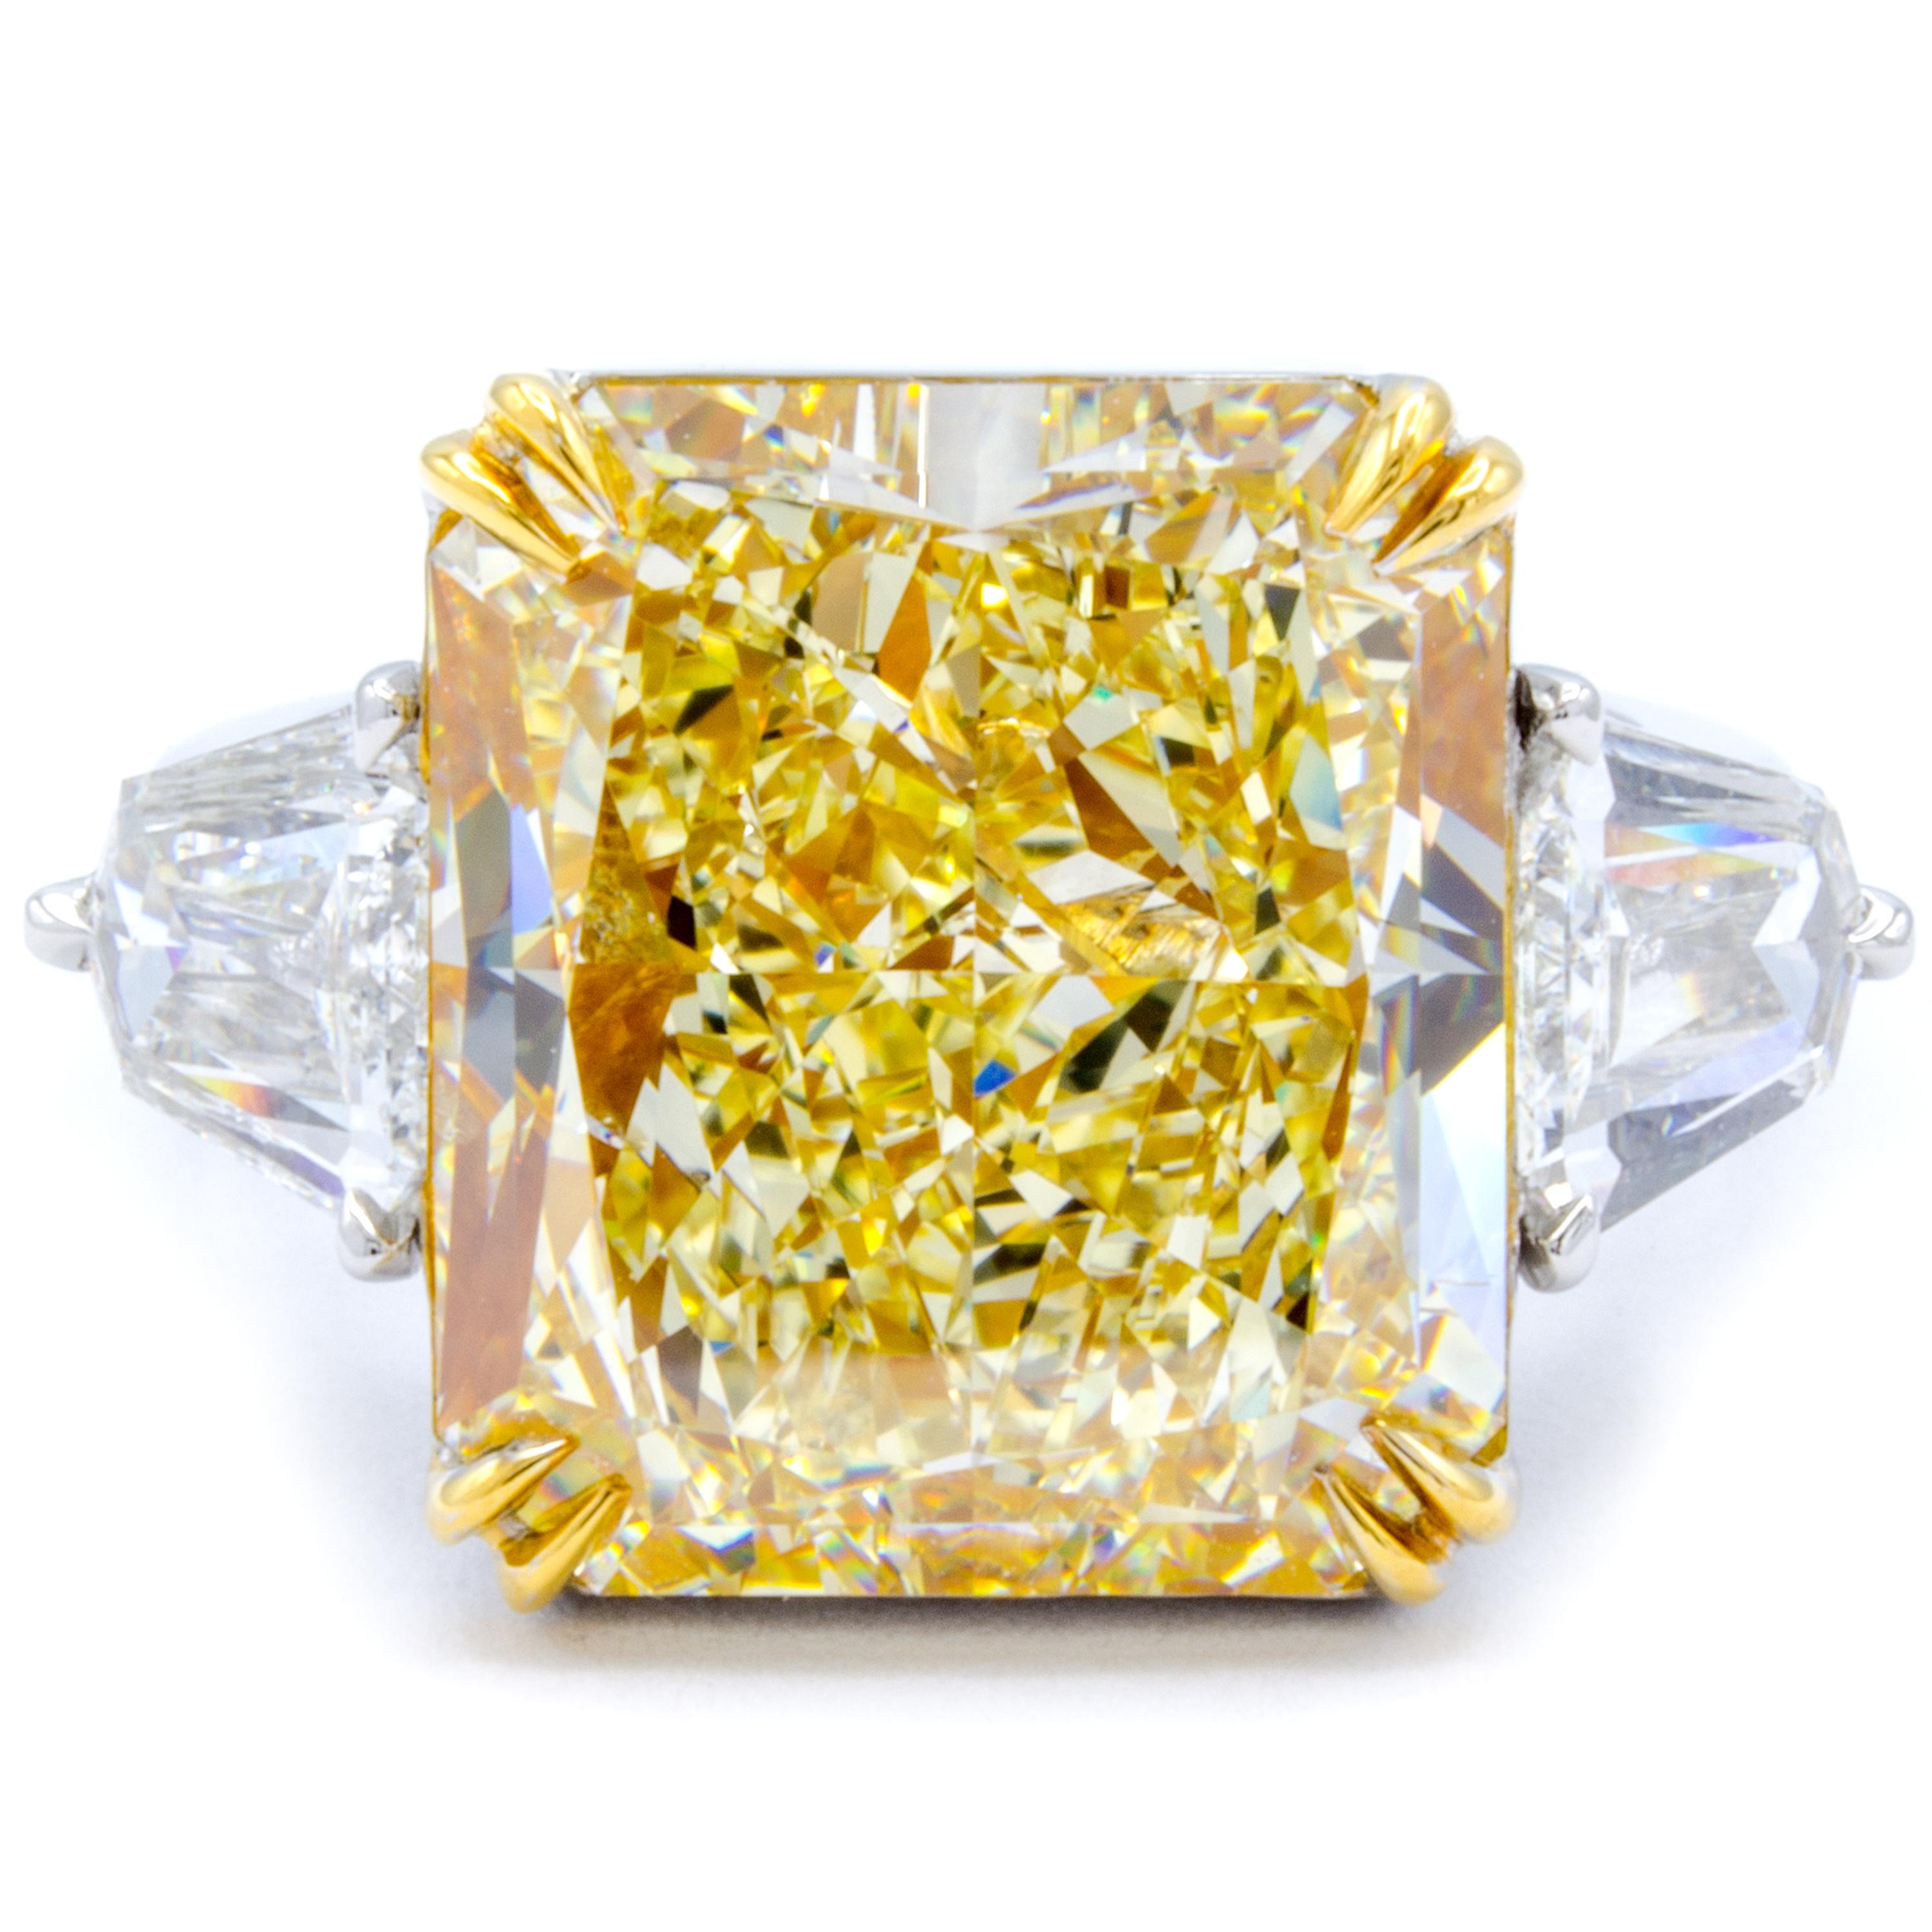 Rosenberg Diamonds & Co. 13.03 carat Radiant cut Light Yellow VS2 clarity is accompanied by a GIA certificate. This incredible bright Radiant is full of life and it is set in a handmade platinum and 18 karat yellow gold setting with perfectly